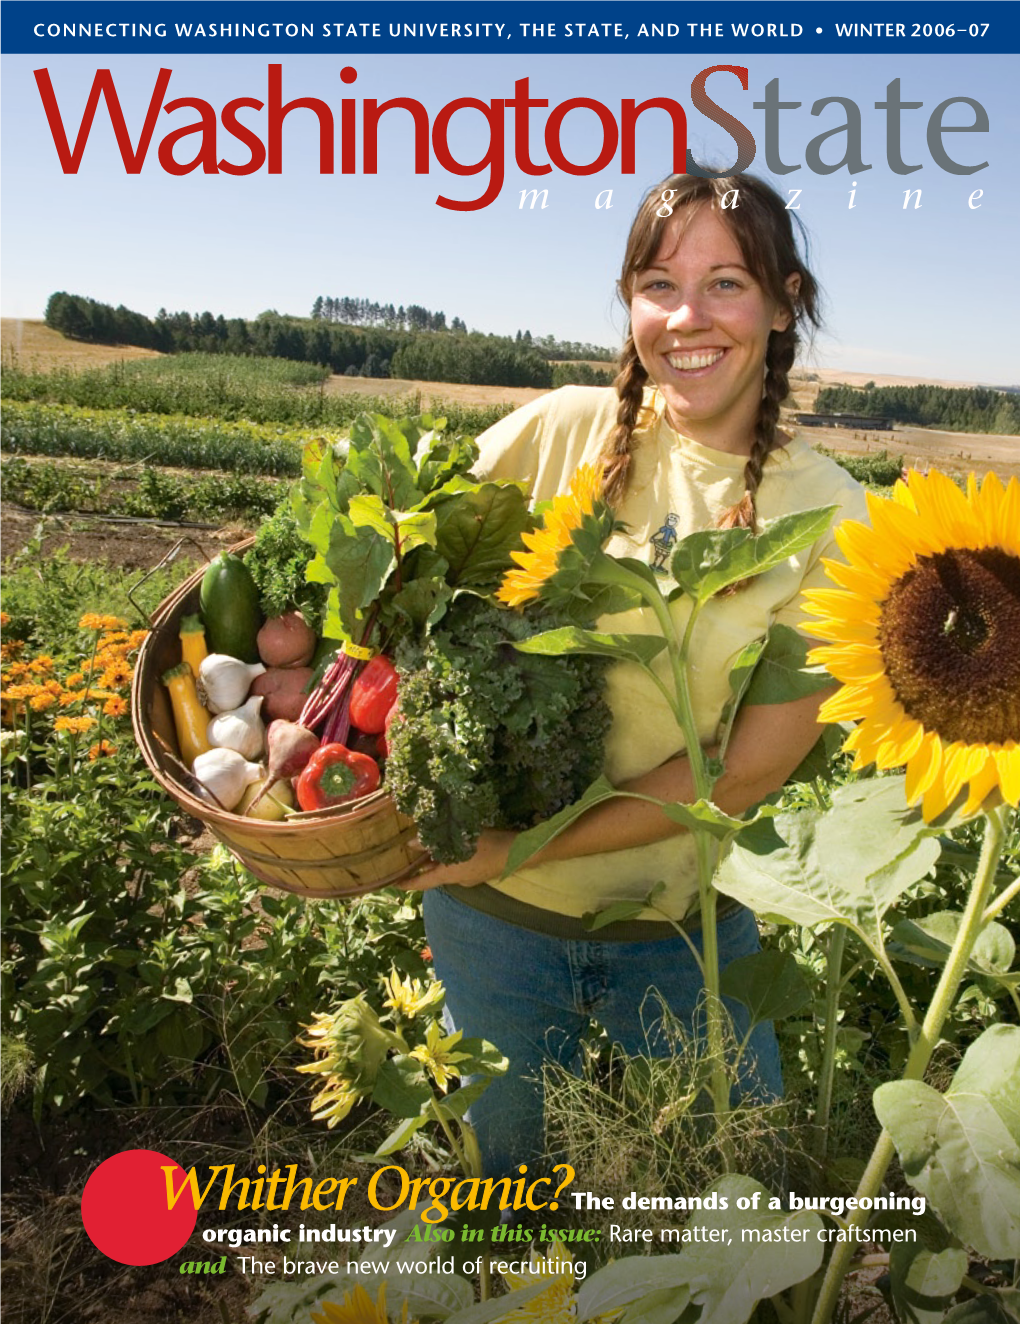 Whither Organic?The Demands of a Burgeoning Organic Industry Also in This Issue: Rare Matter, Master Craftsmen and the Brave New World of Recruiting